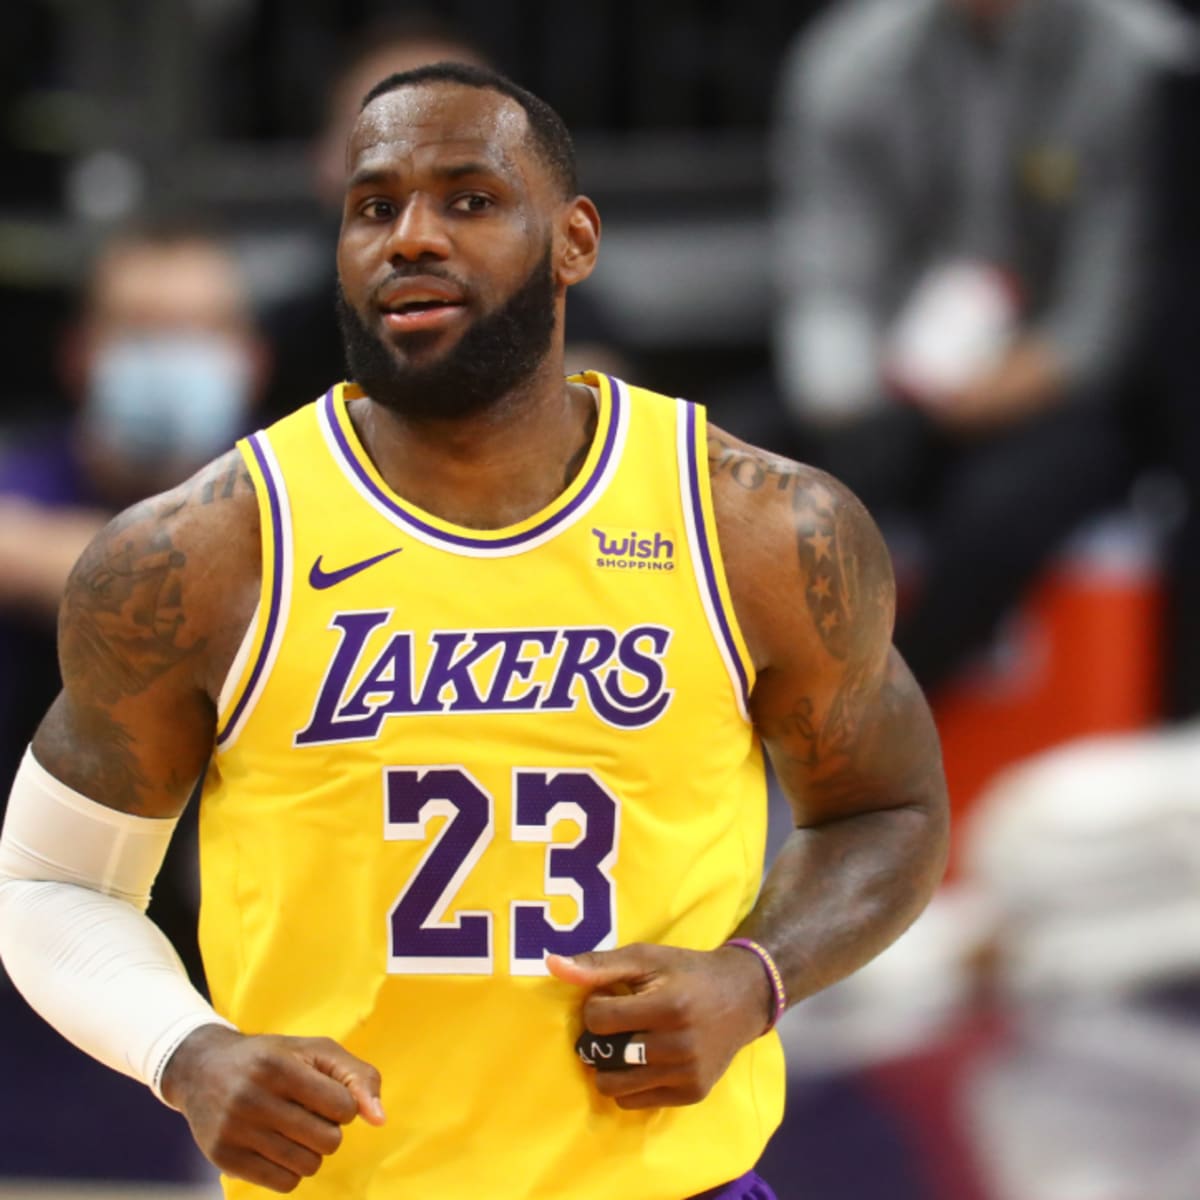 Lakers star LeBron James' jersey retirement addressed by Jeanie Buss